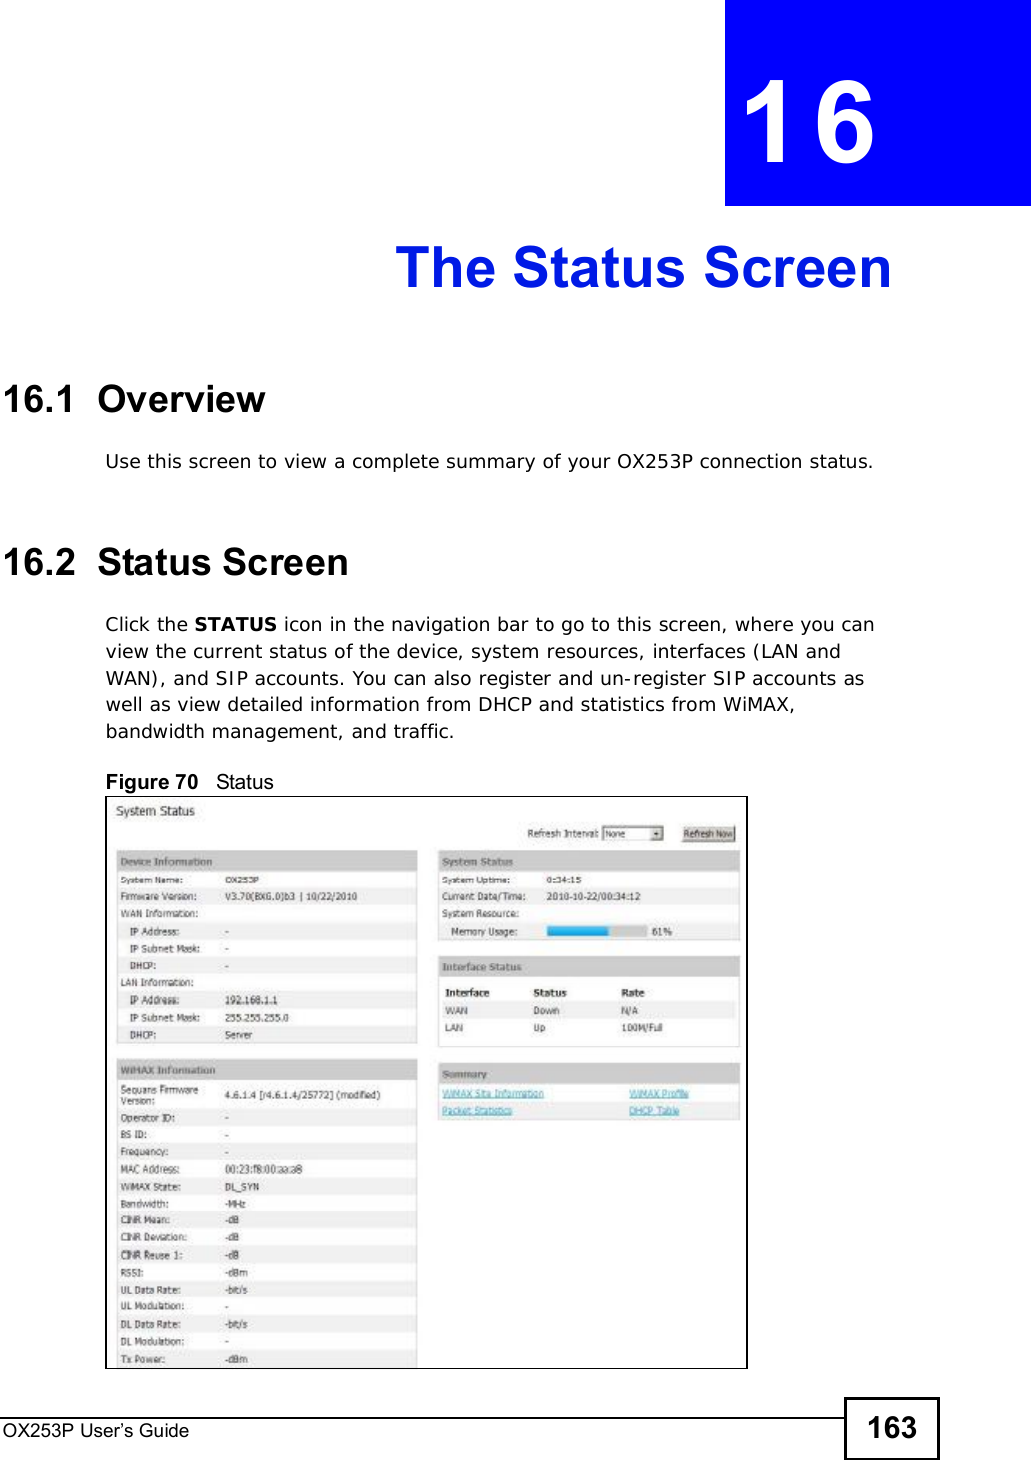 OX253P User’s Guide 163CHAPTER 16The Status Screen16.1  OverviewUse this screen to view a complete summary of your OX253P connection status.16.2  Status ScreenClick the STATUS icon in the navigation bar to go to this screen, where you can view the current status of the device, system resources, interfaces (LAN and WAN), and SIP accounts. You can also register and un-register SIP accounts as well as view detailed information from DHCP and statistics from WiMAX, bandwidth management, and traffic.Figure 70   Status